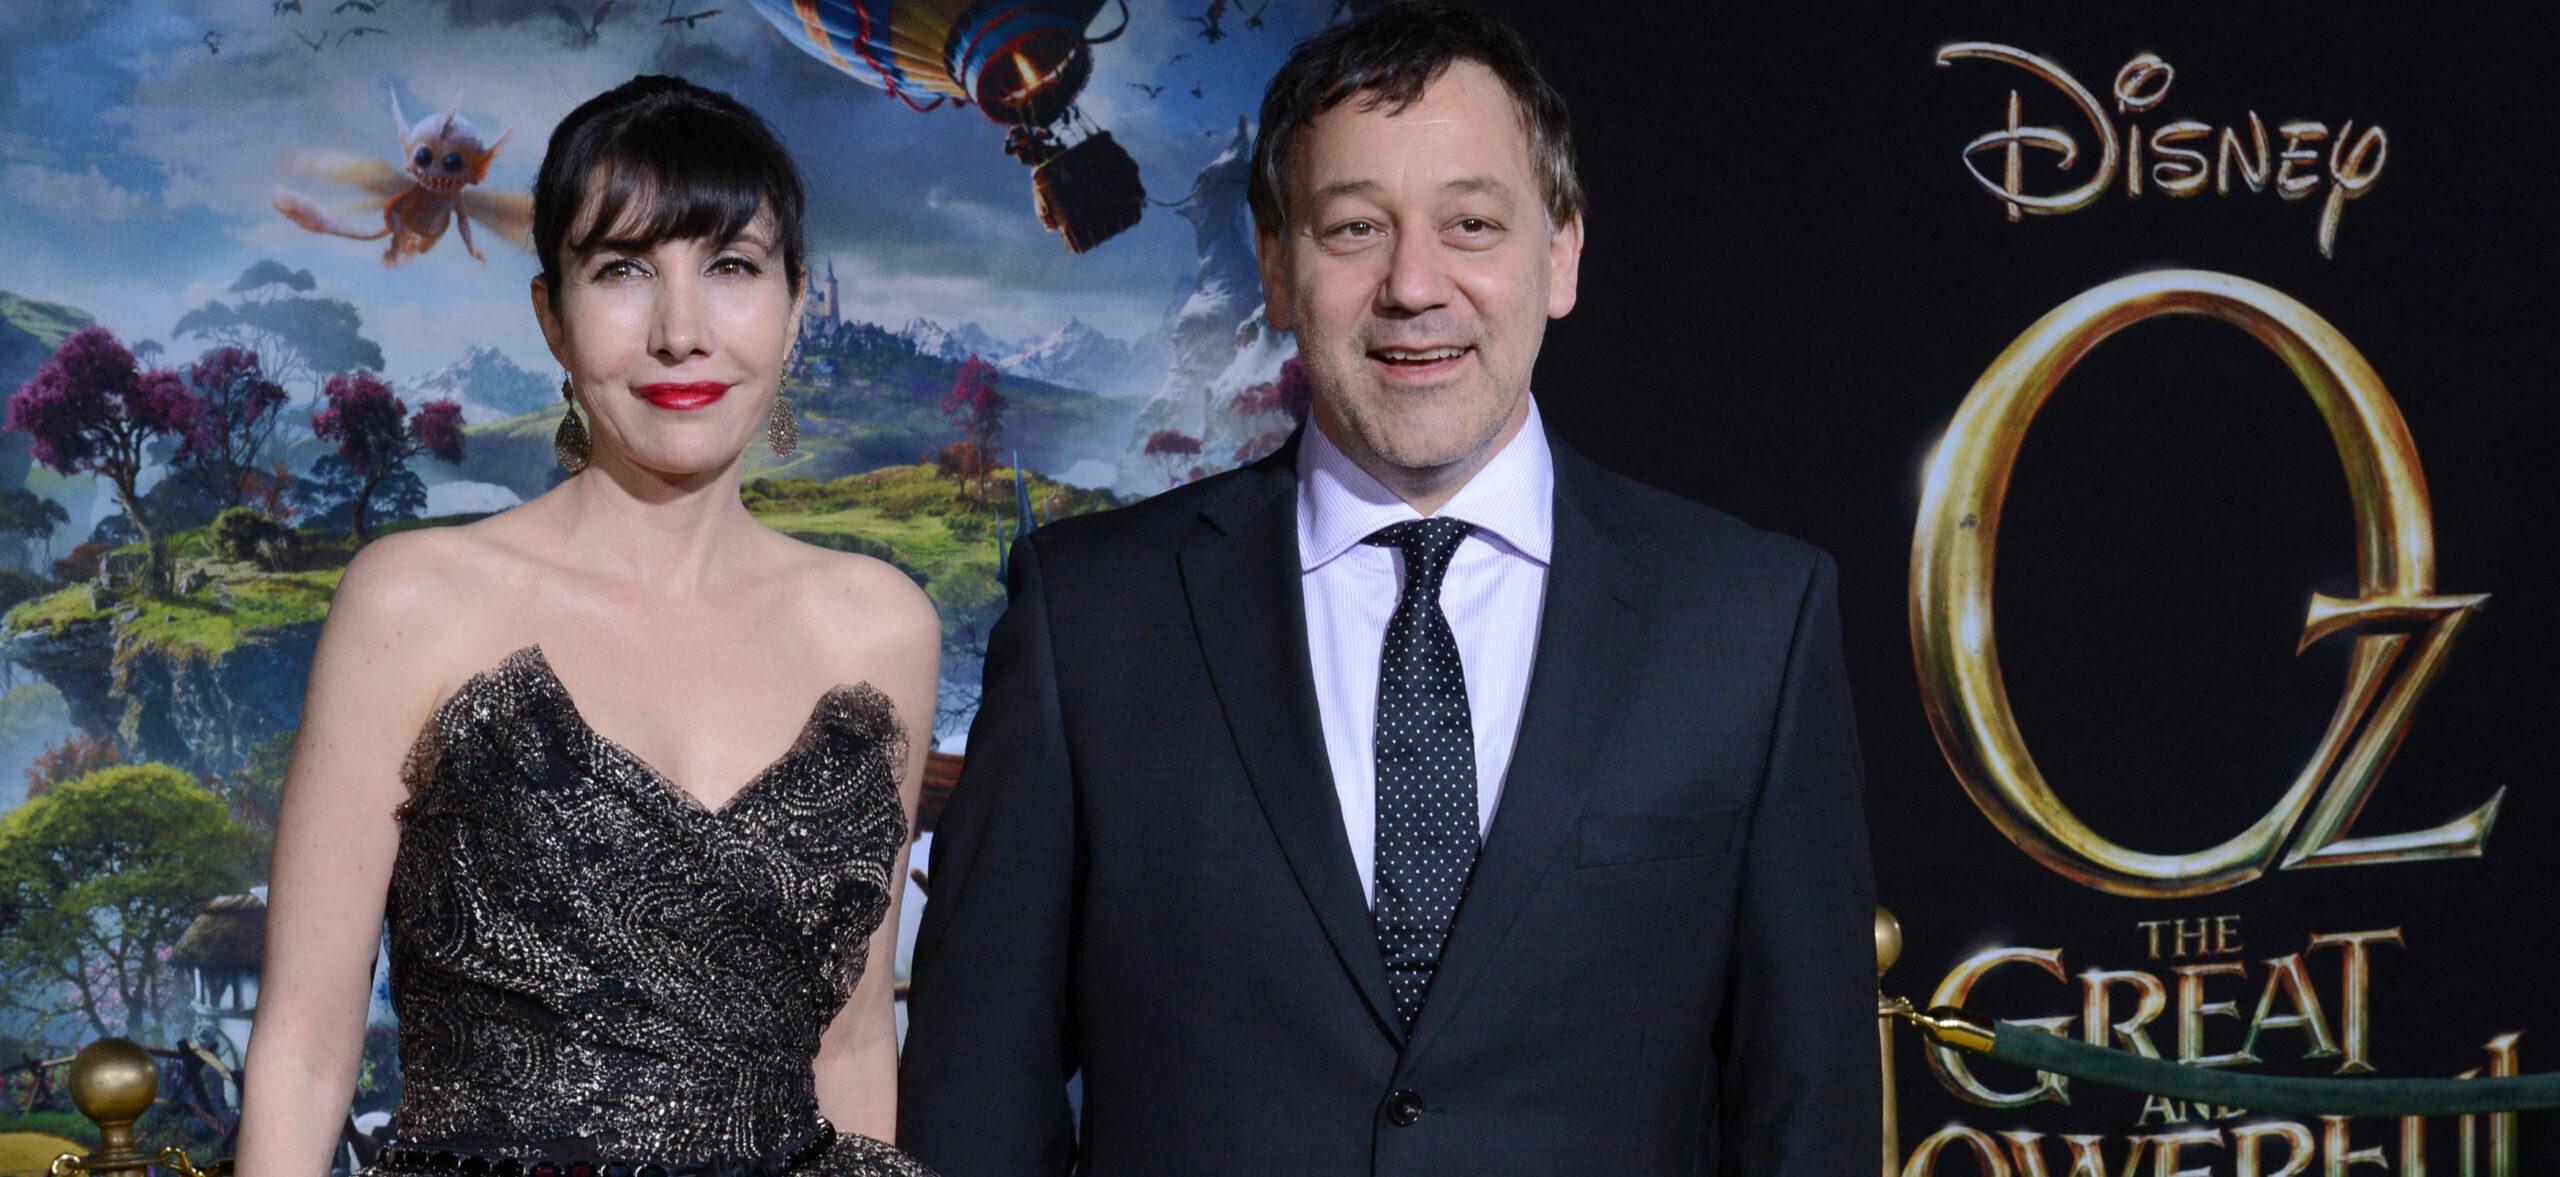 Sam Raimi's Wife, Gillian Greene, Files For Divorce After 30 Years And Demands Spousal Support